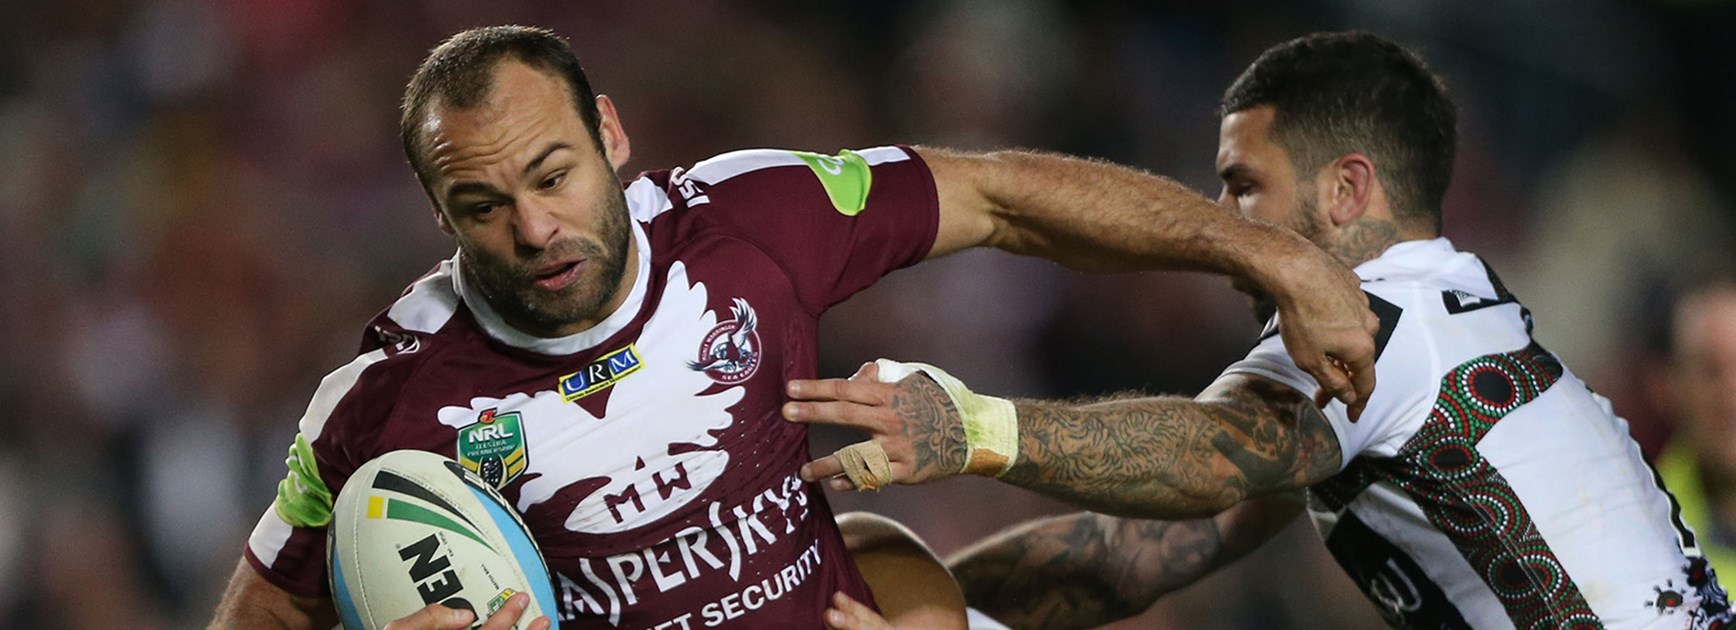 Manly fullback Brett Stewart in action against the Rabbitohs in Round 22.